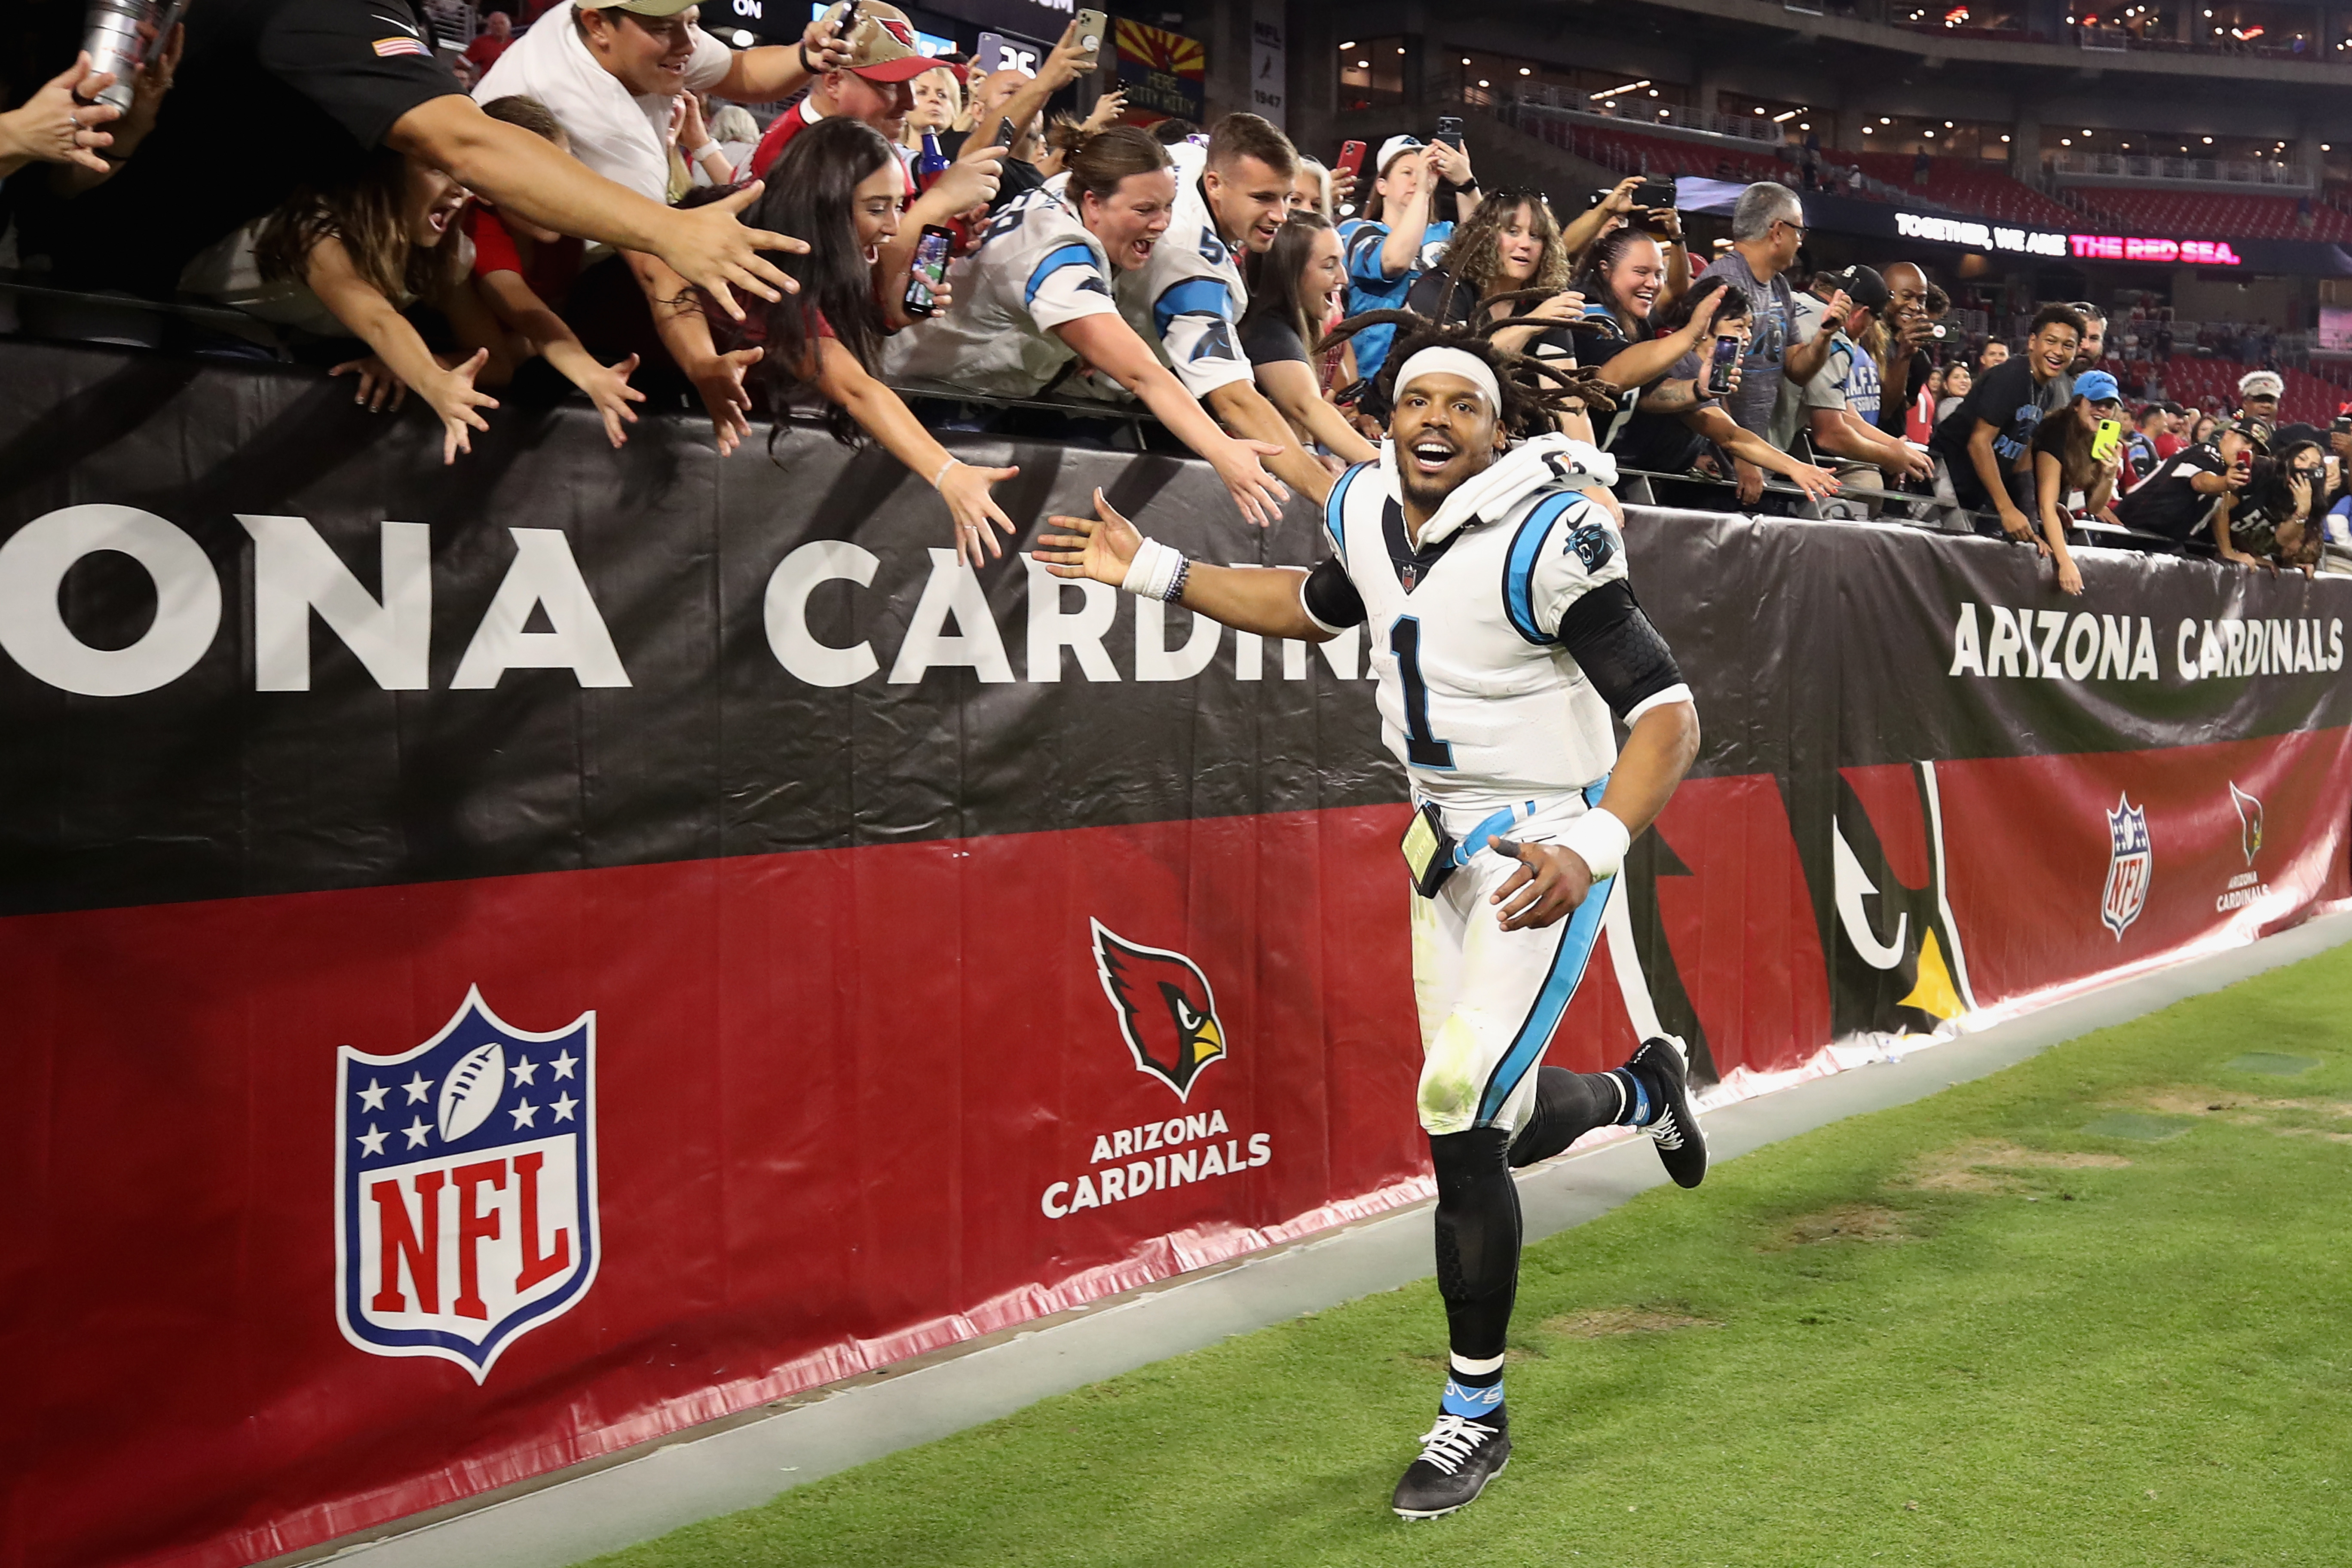 Panthers QB Cam Newton celebrating with fans